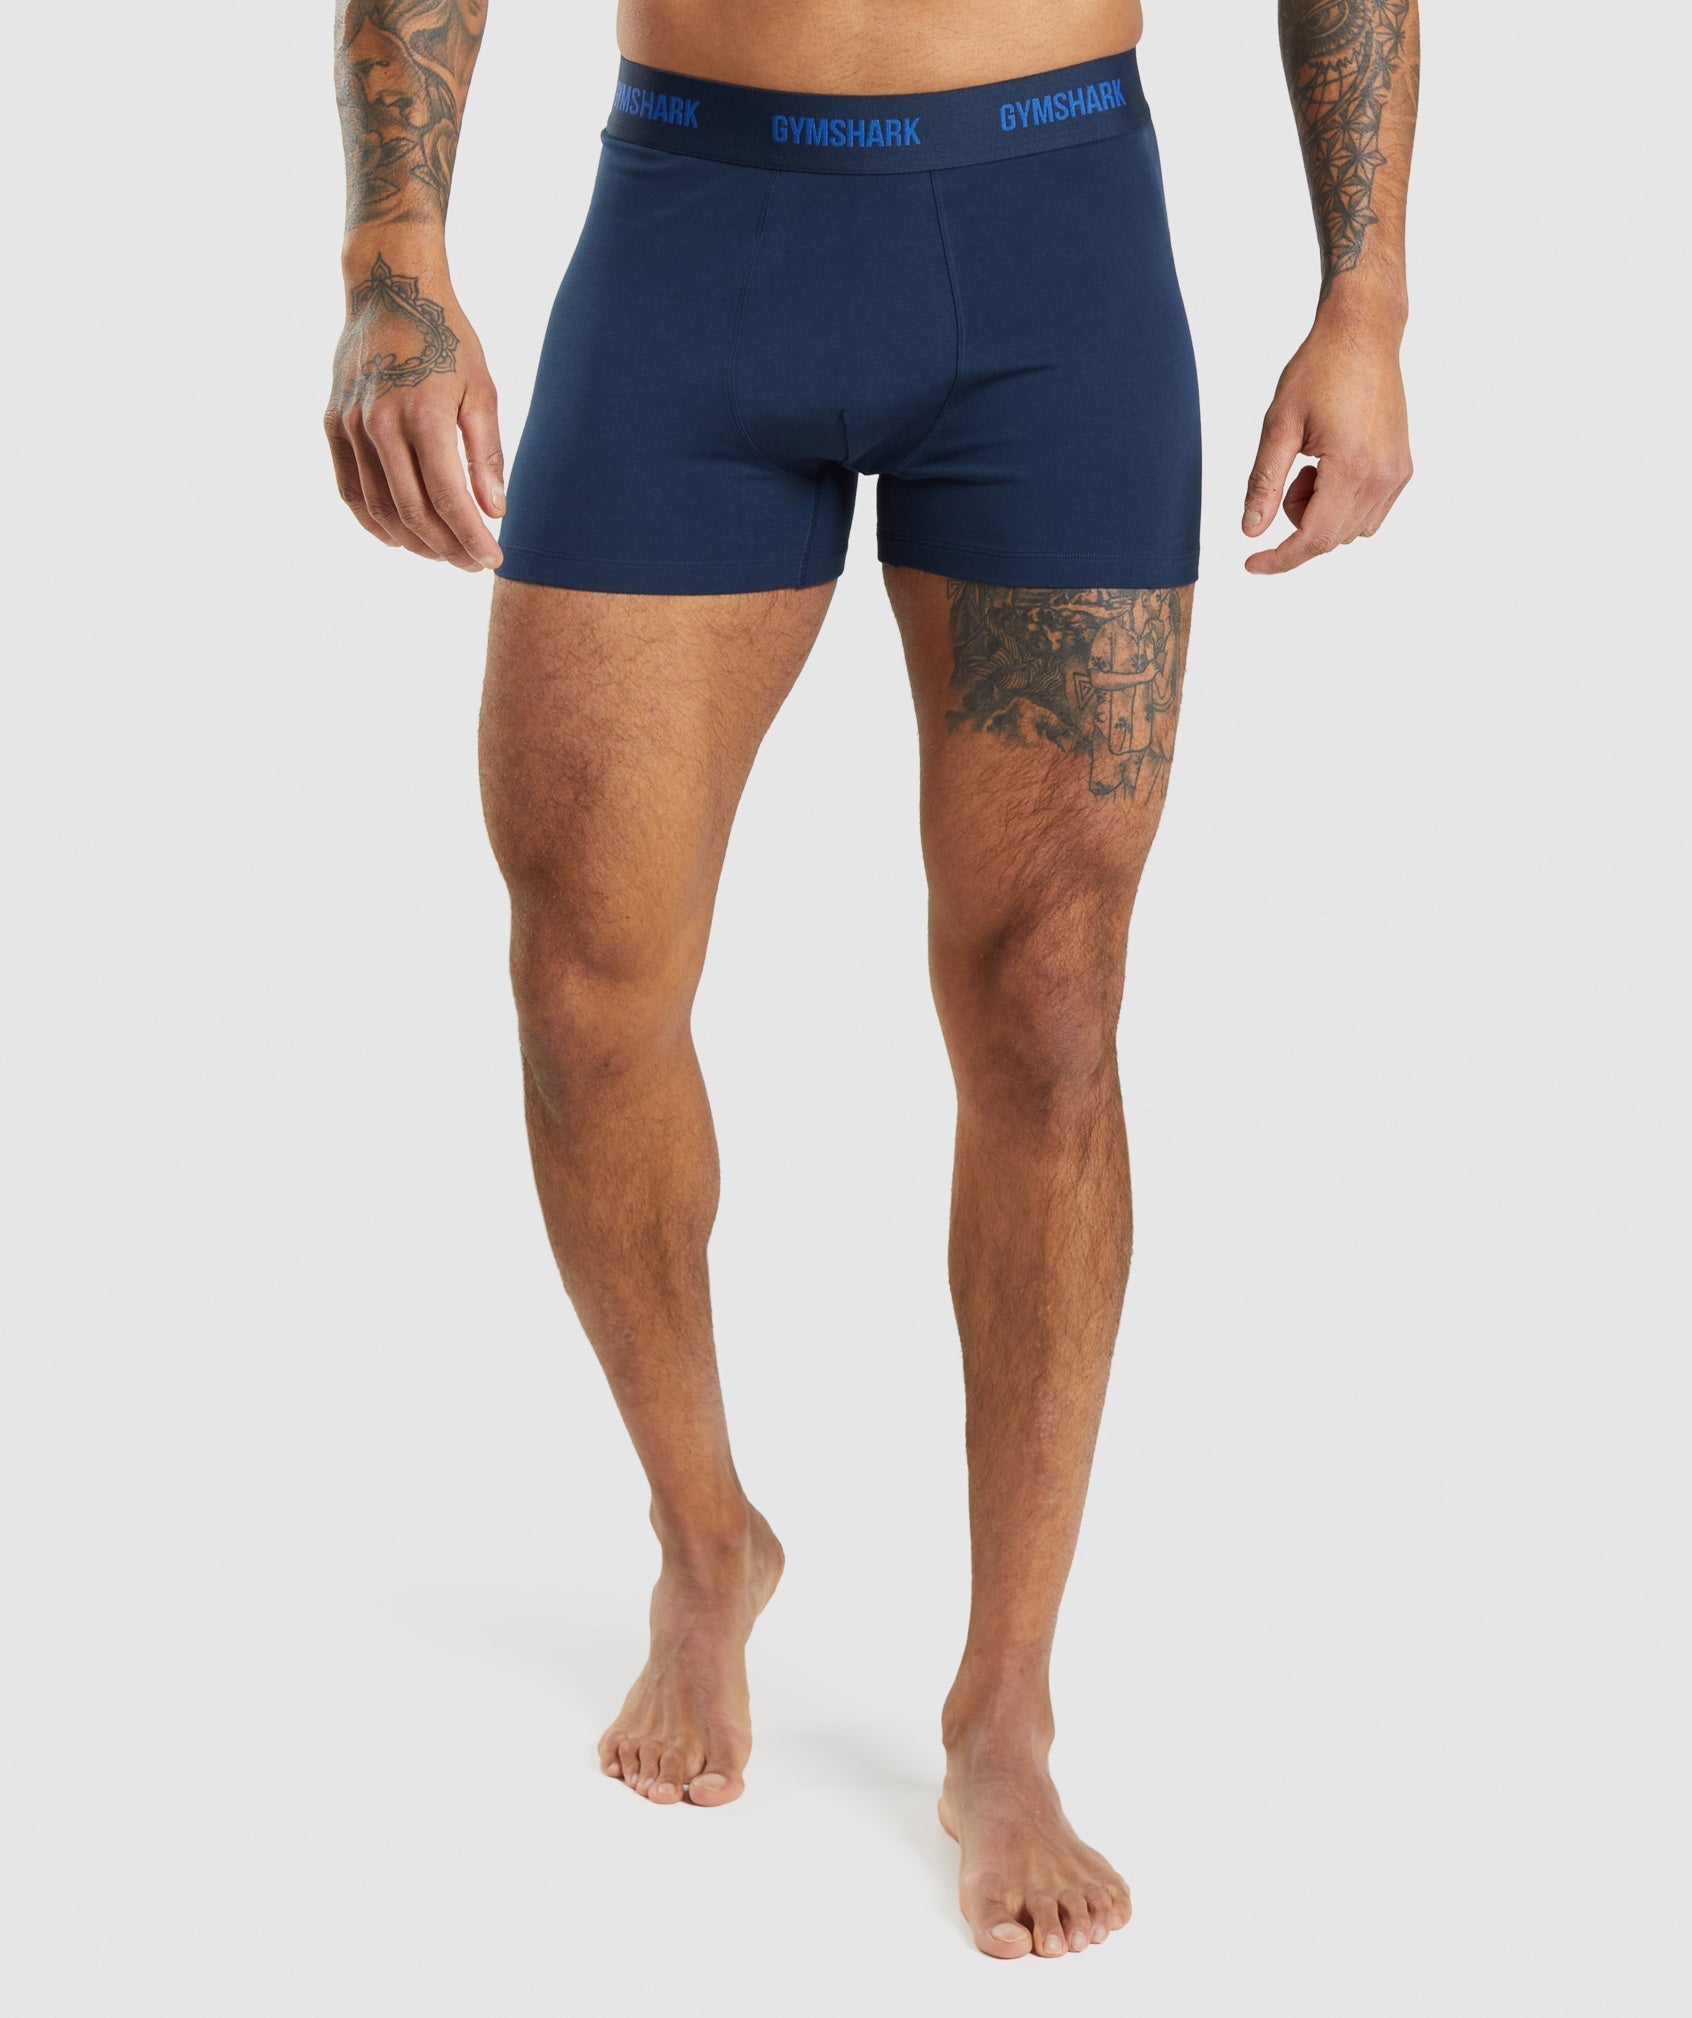 Boxers 2pk in Core Olive/Navy